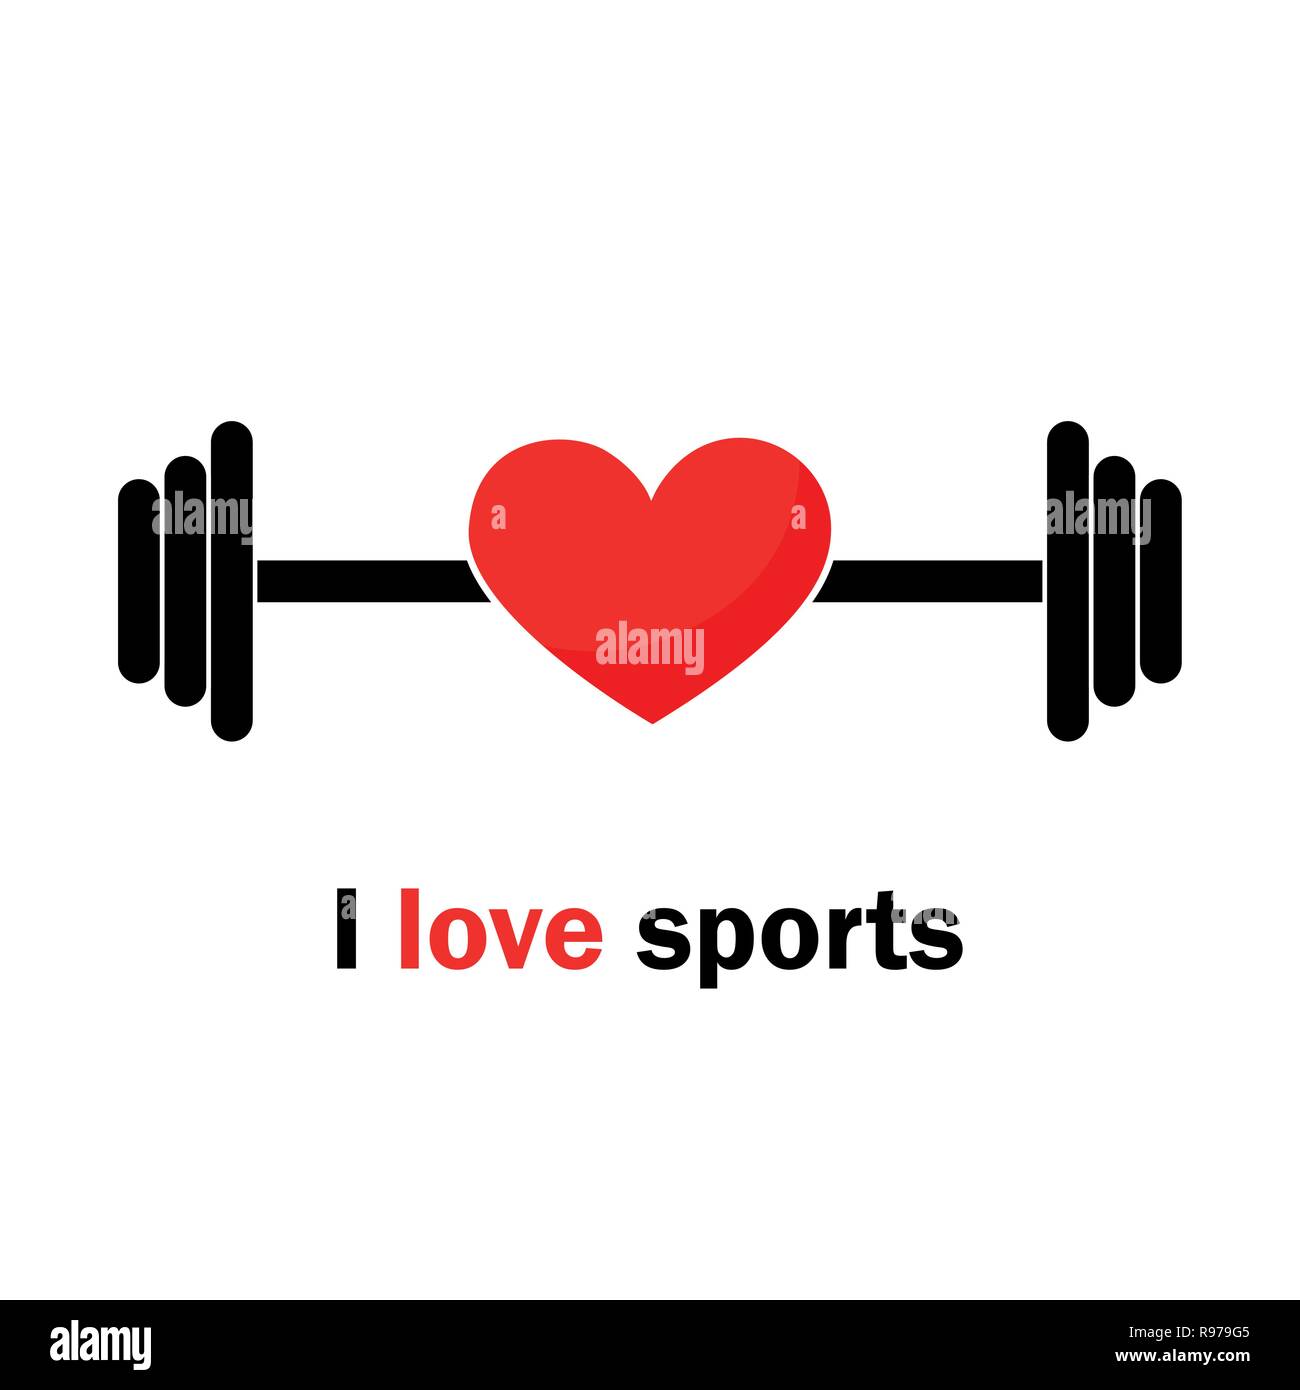 I love sports icon with heart and barbell vector illustration EPS10 Stock Vector